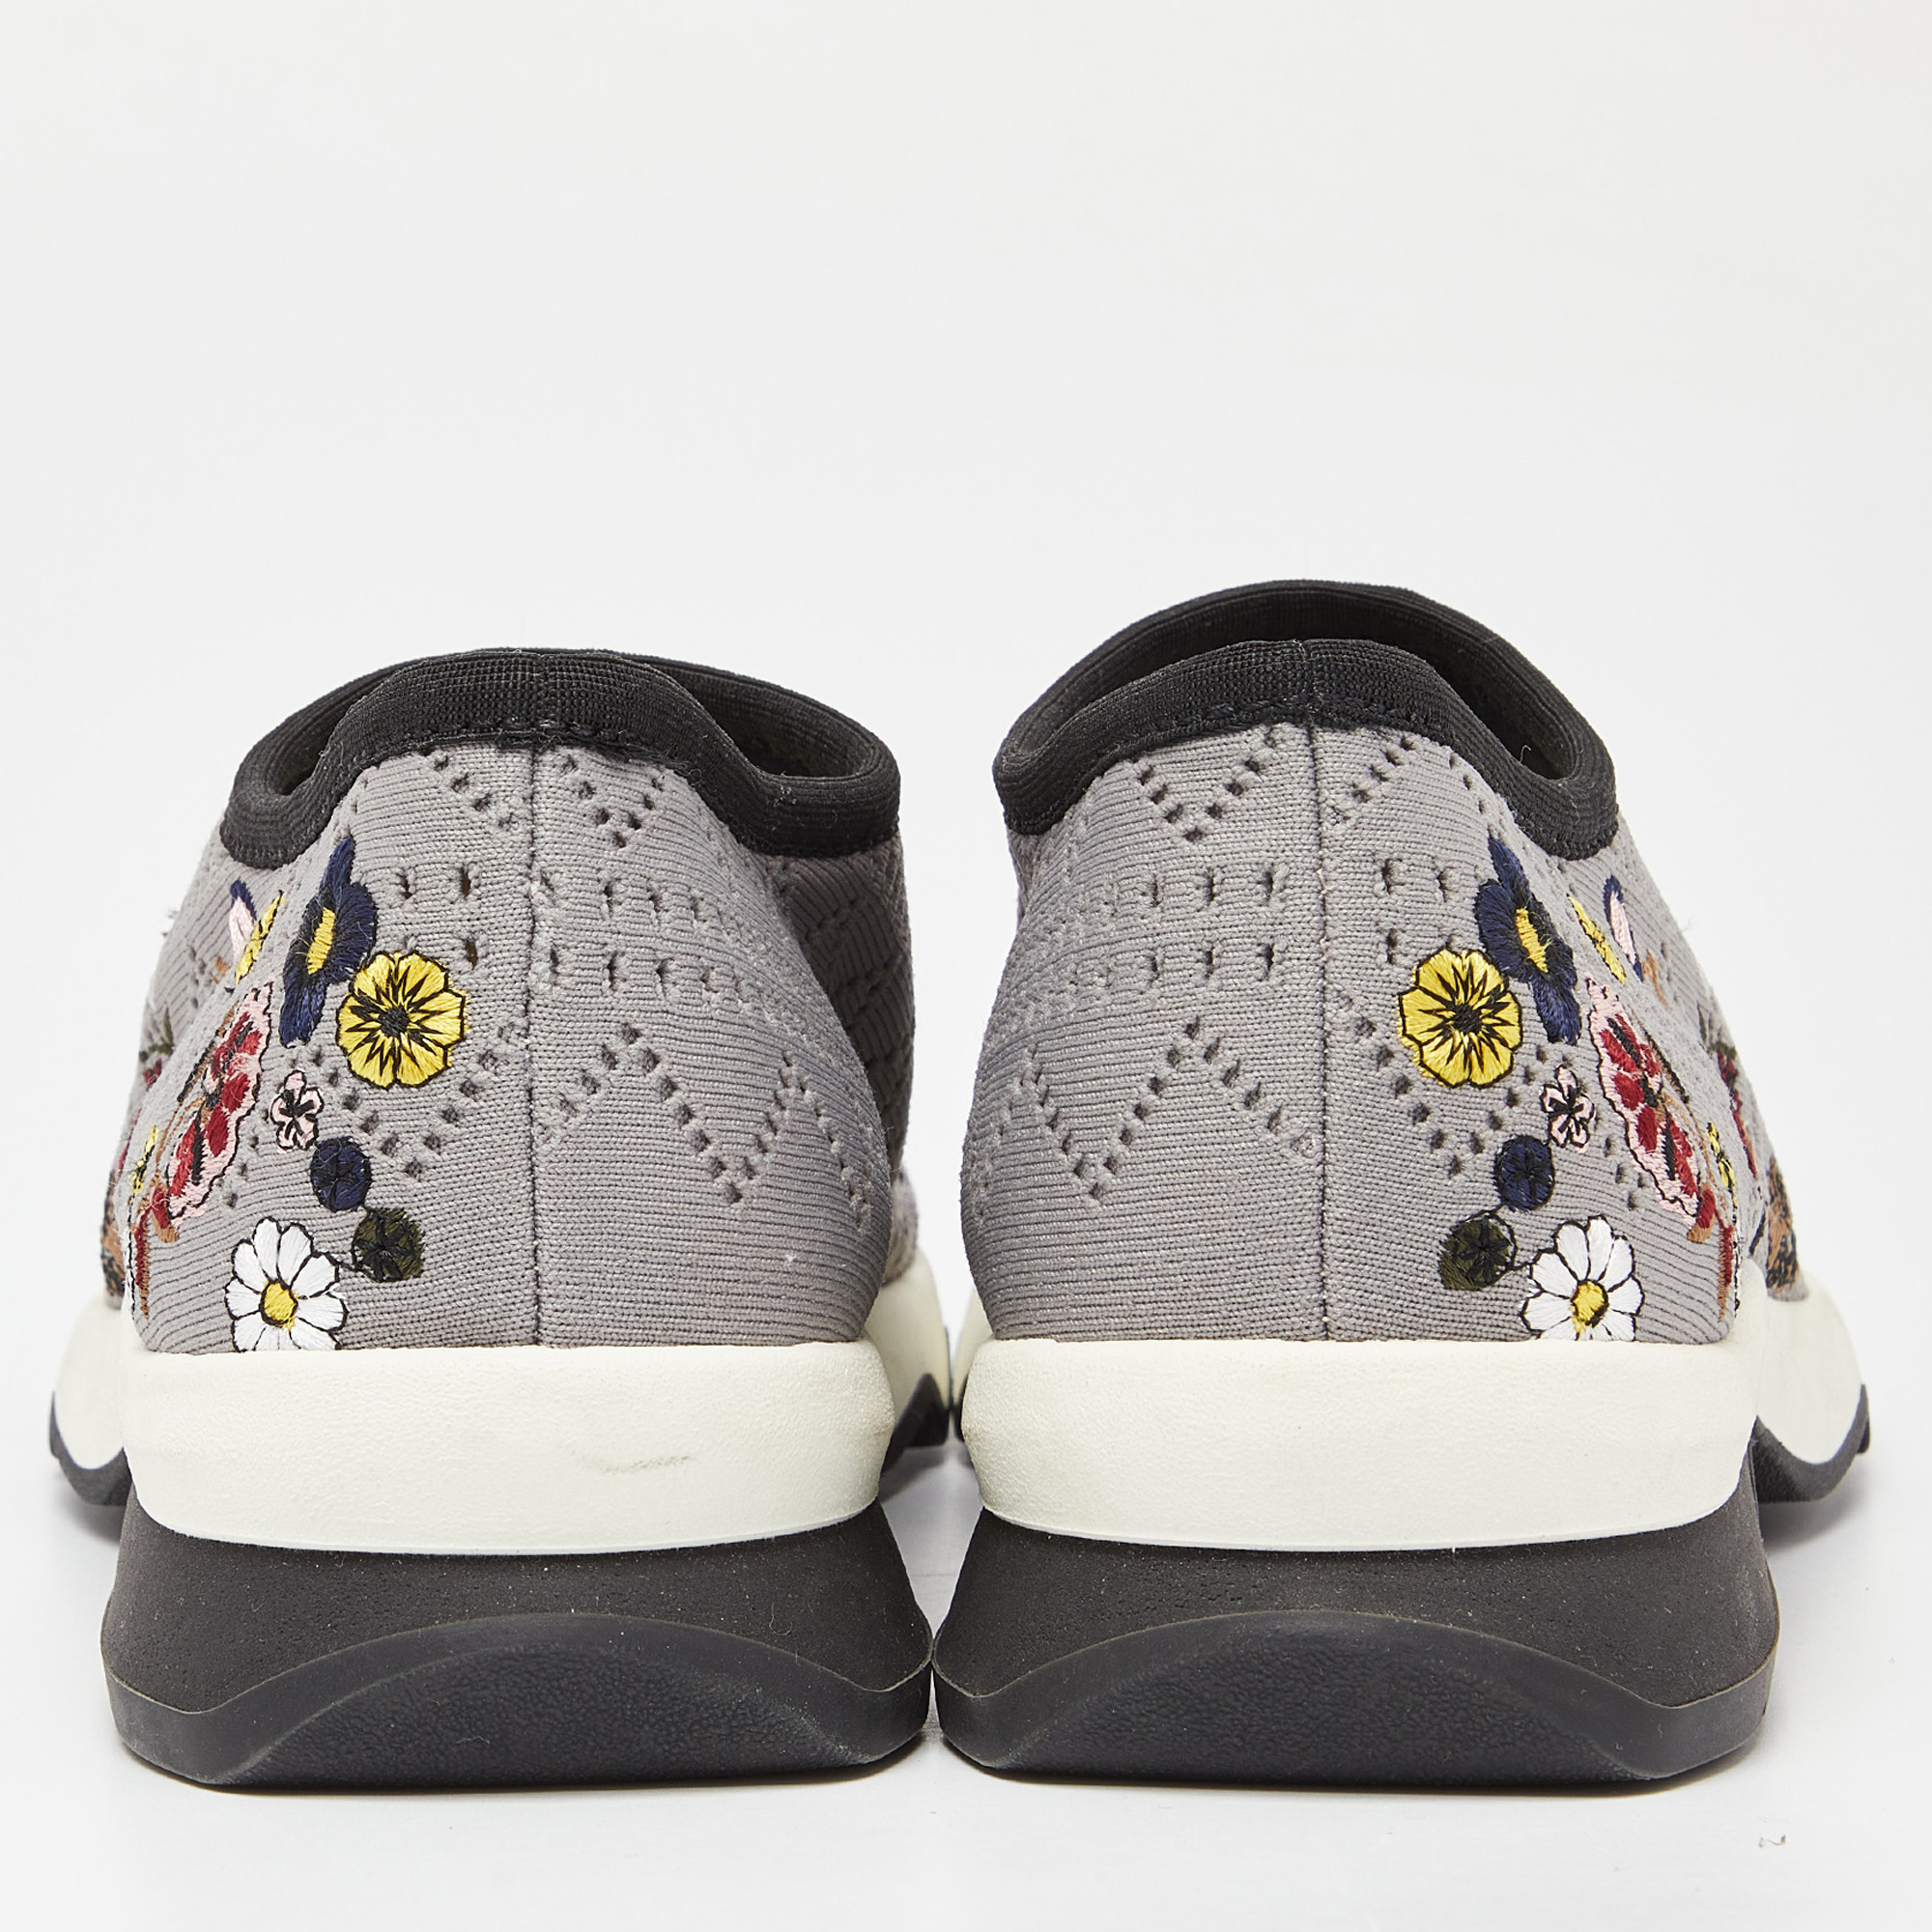 Fendi Grey Floral Embroidered Knit Fabric Slip On Sneakers Size 36